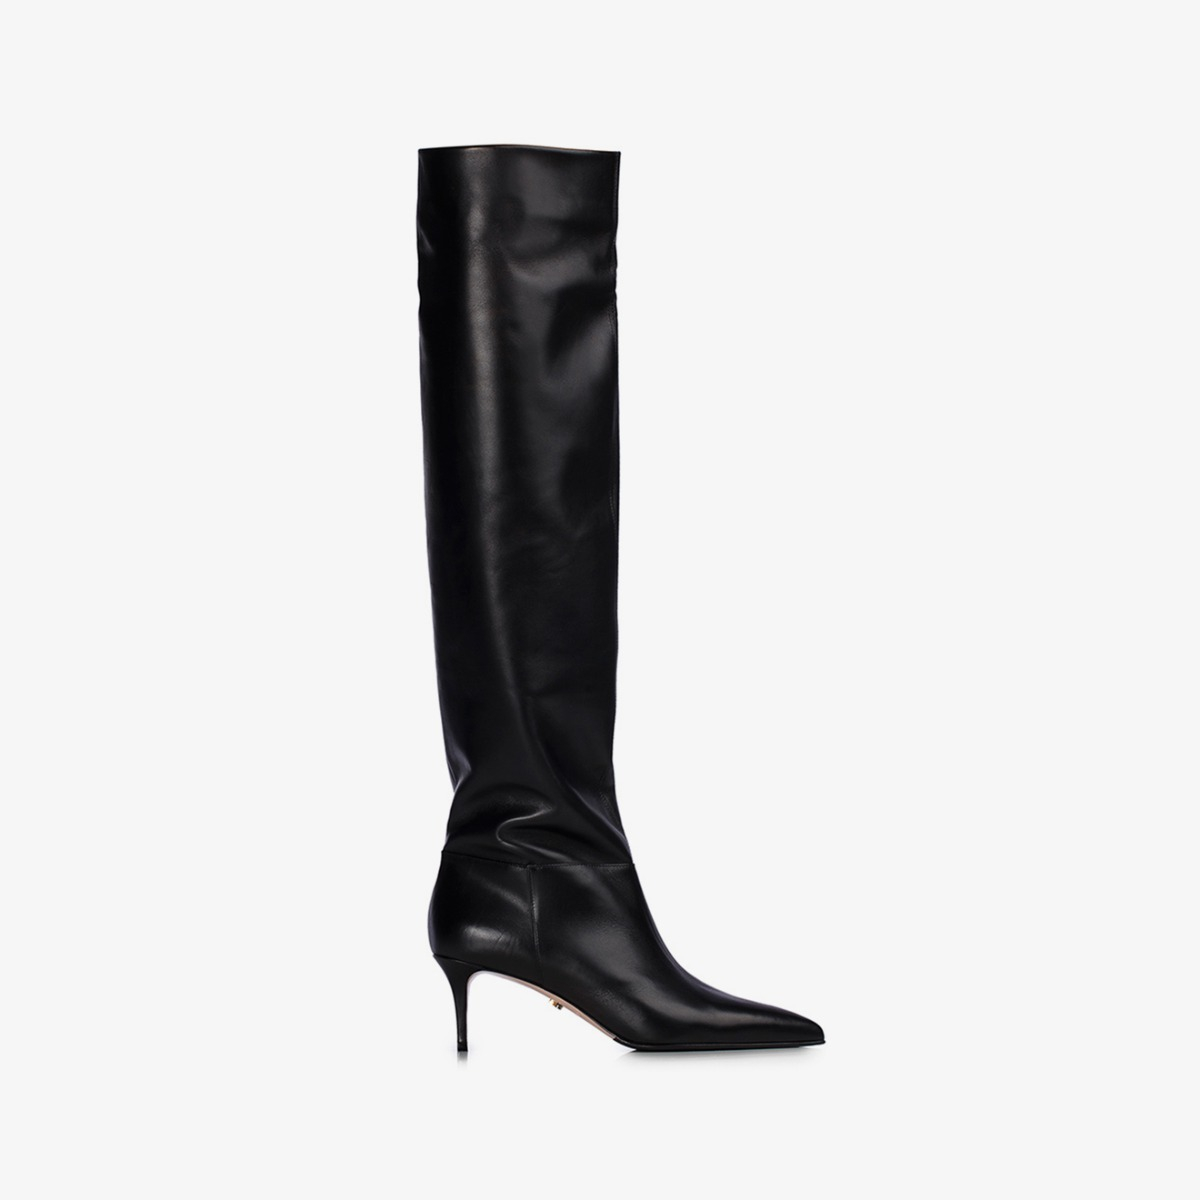 EVA BOOT 60 mm - Le Silla official outlet